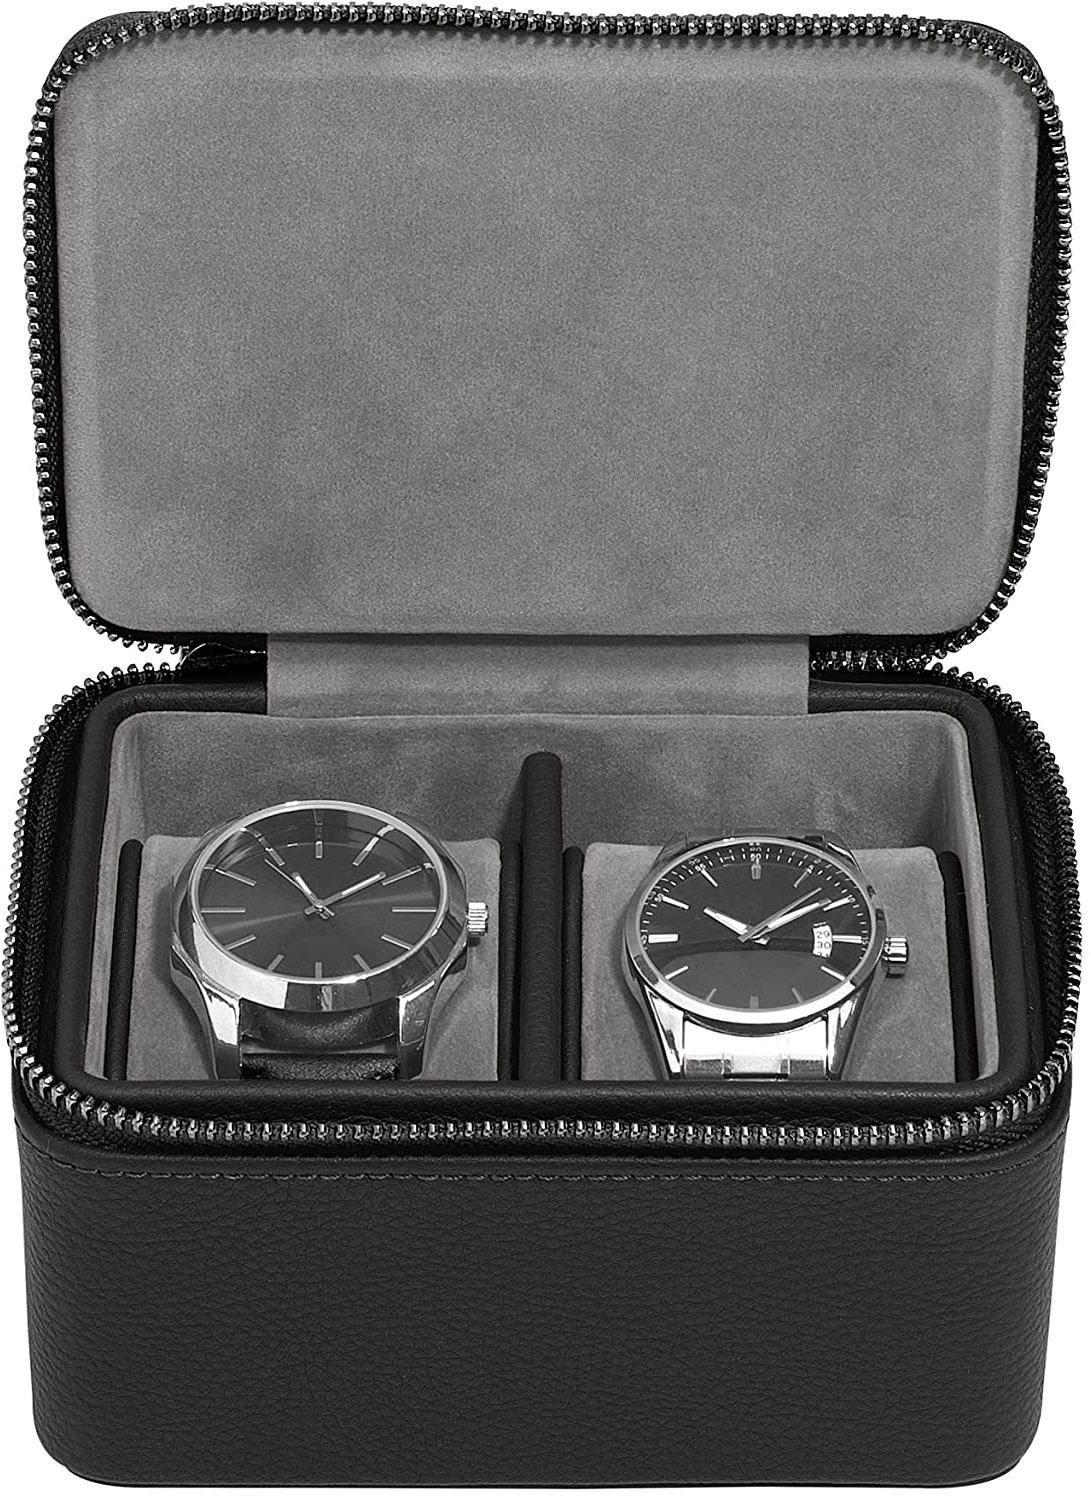 Stackers Pebble Black Double Watch Box